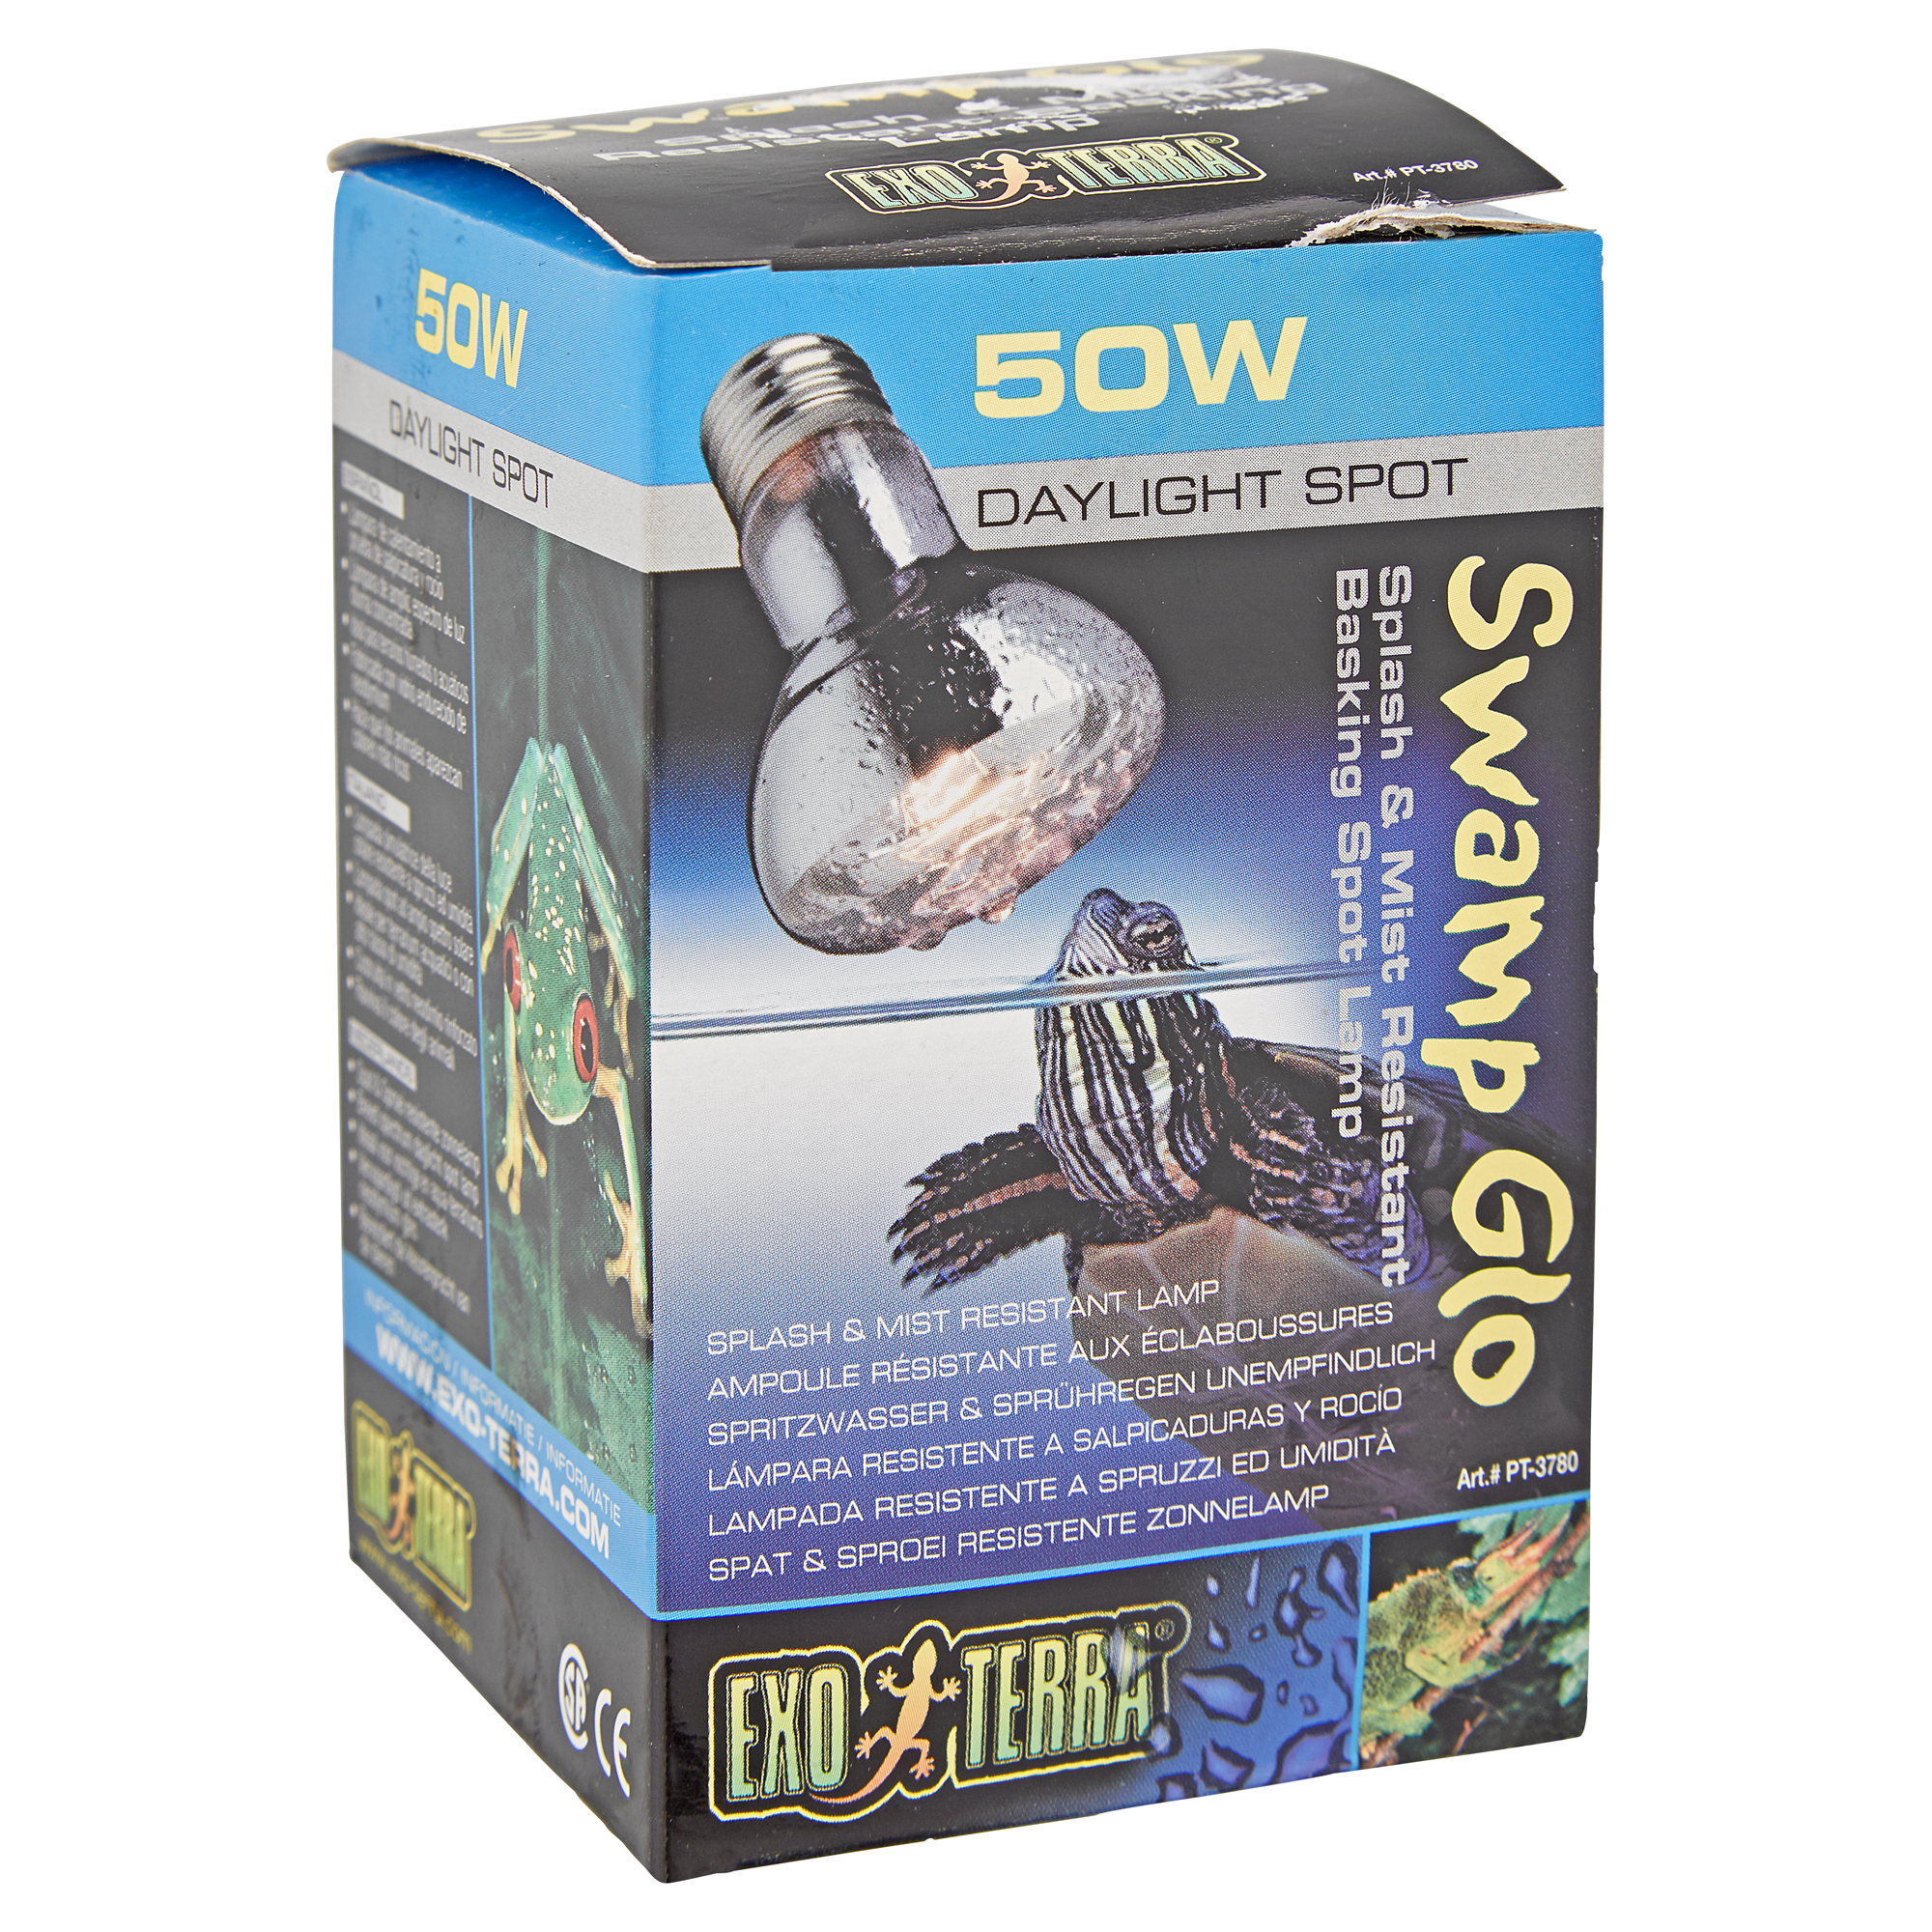 Tageslichtlampe "Swamp Glo" Basking Spot Lamp 50 W + product picture